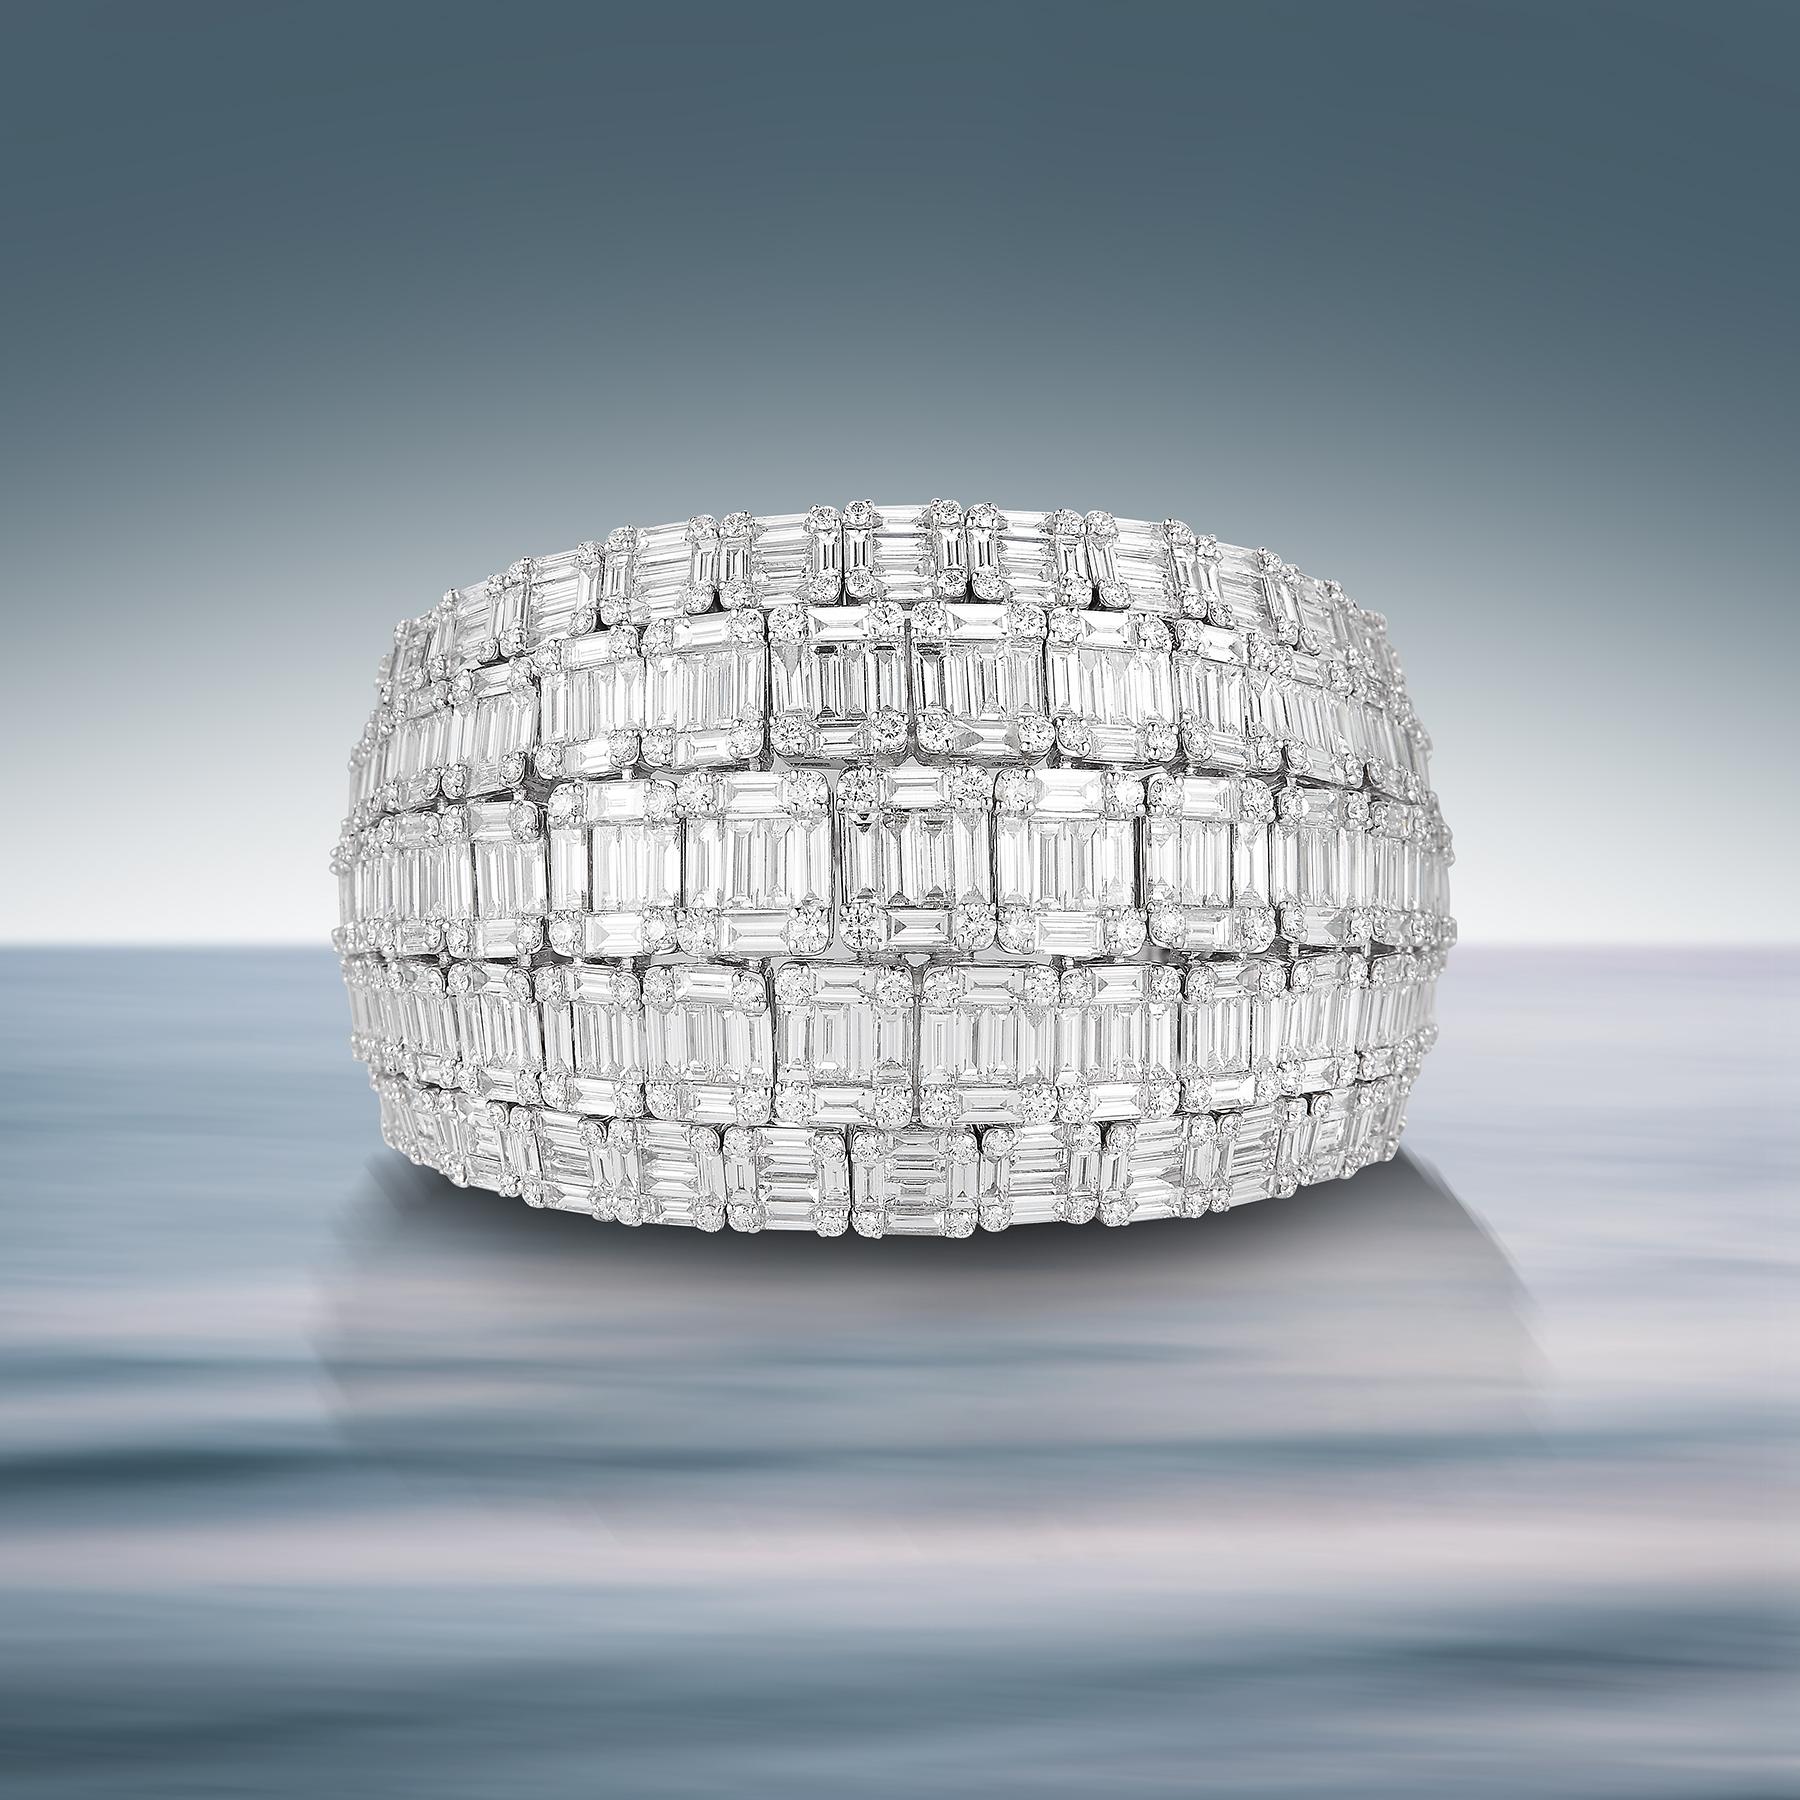 Breathtaking 18K White Gold Bangle Bracelet in a unique Cuff-Style with 5 Rows of 550 White Round Diamonds totaling 5.31 Carats & 662 Dazzling Baguette Diamonds totaling 33.01 Carats.